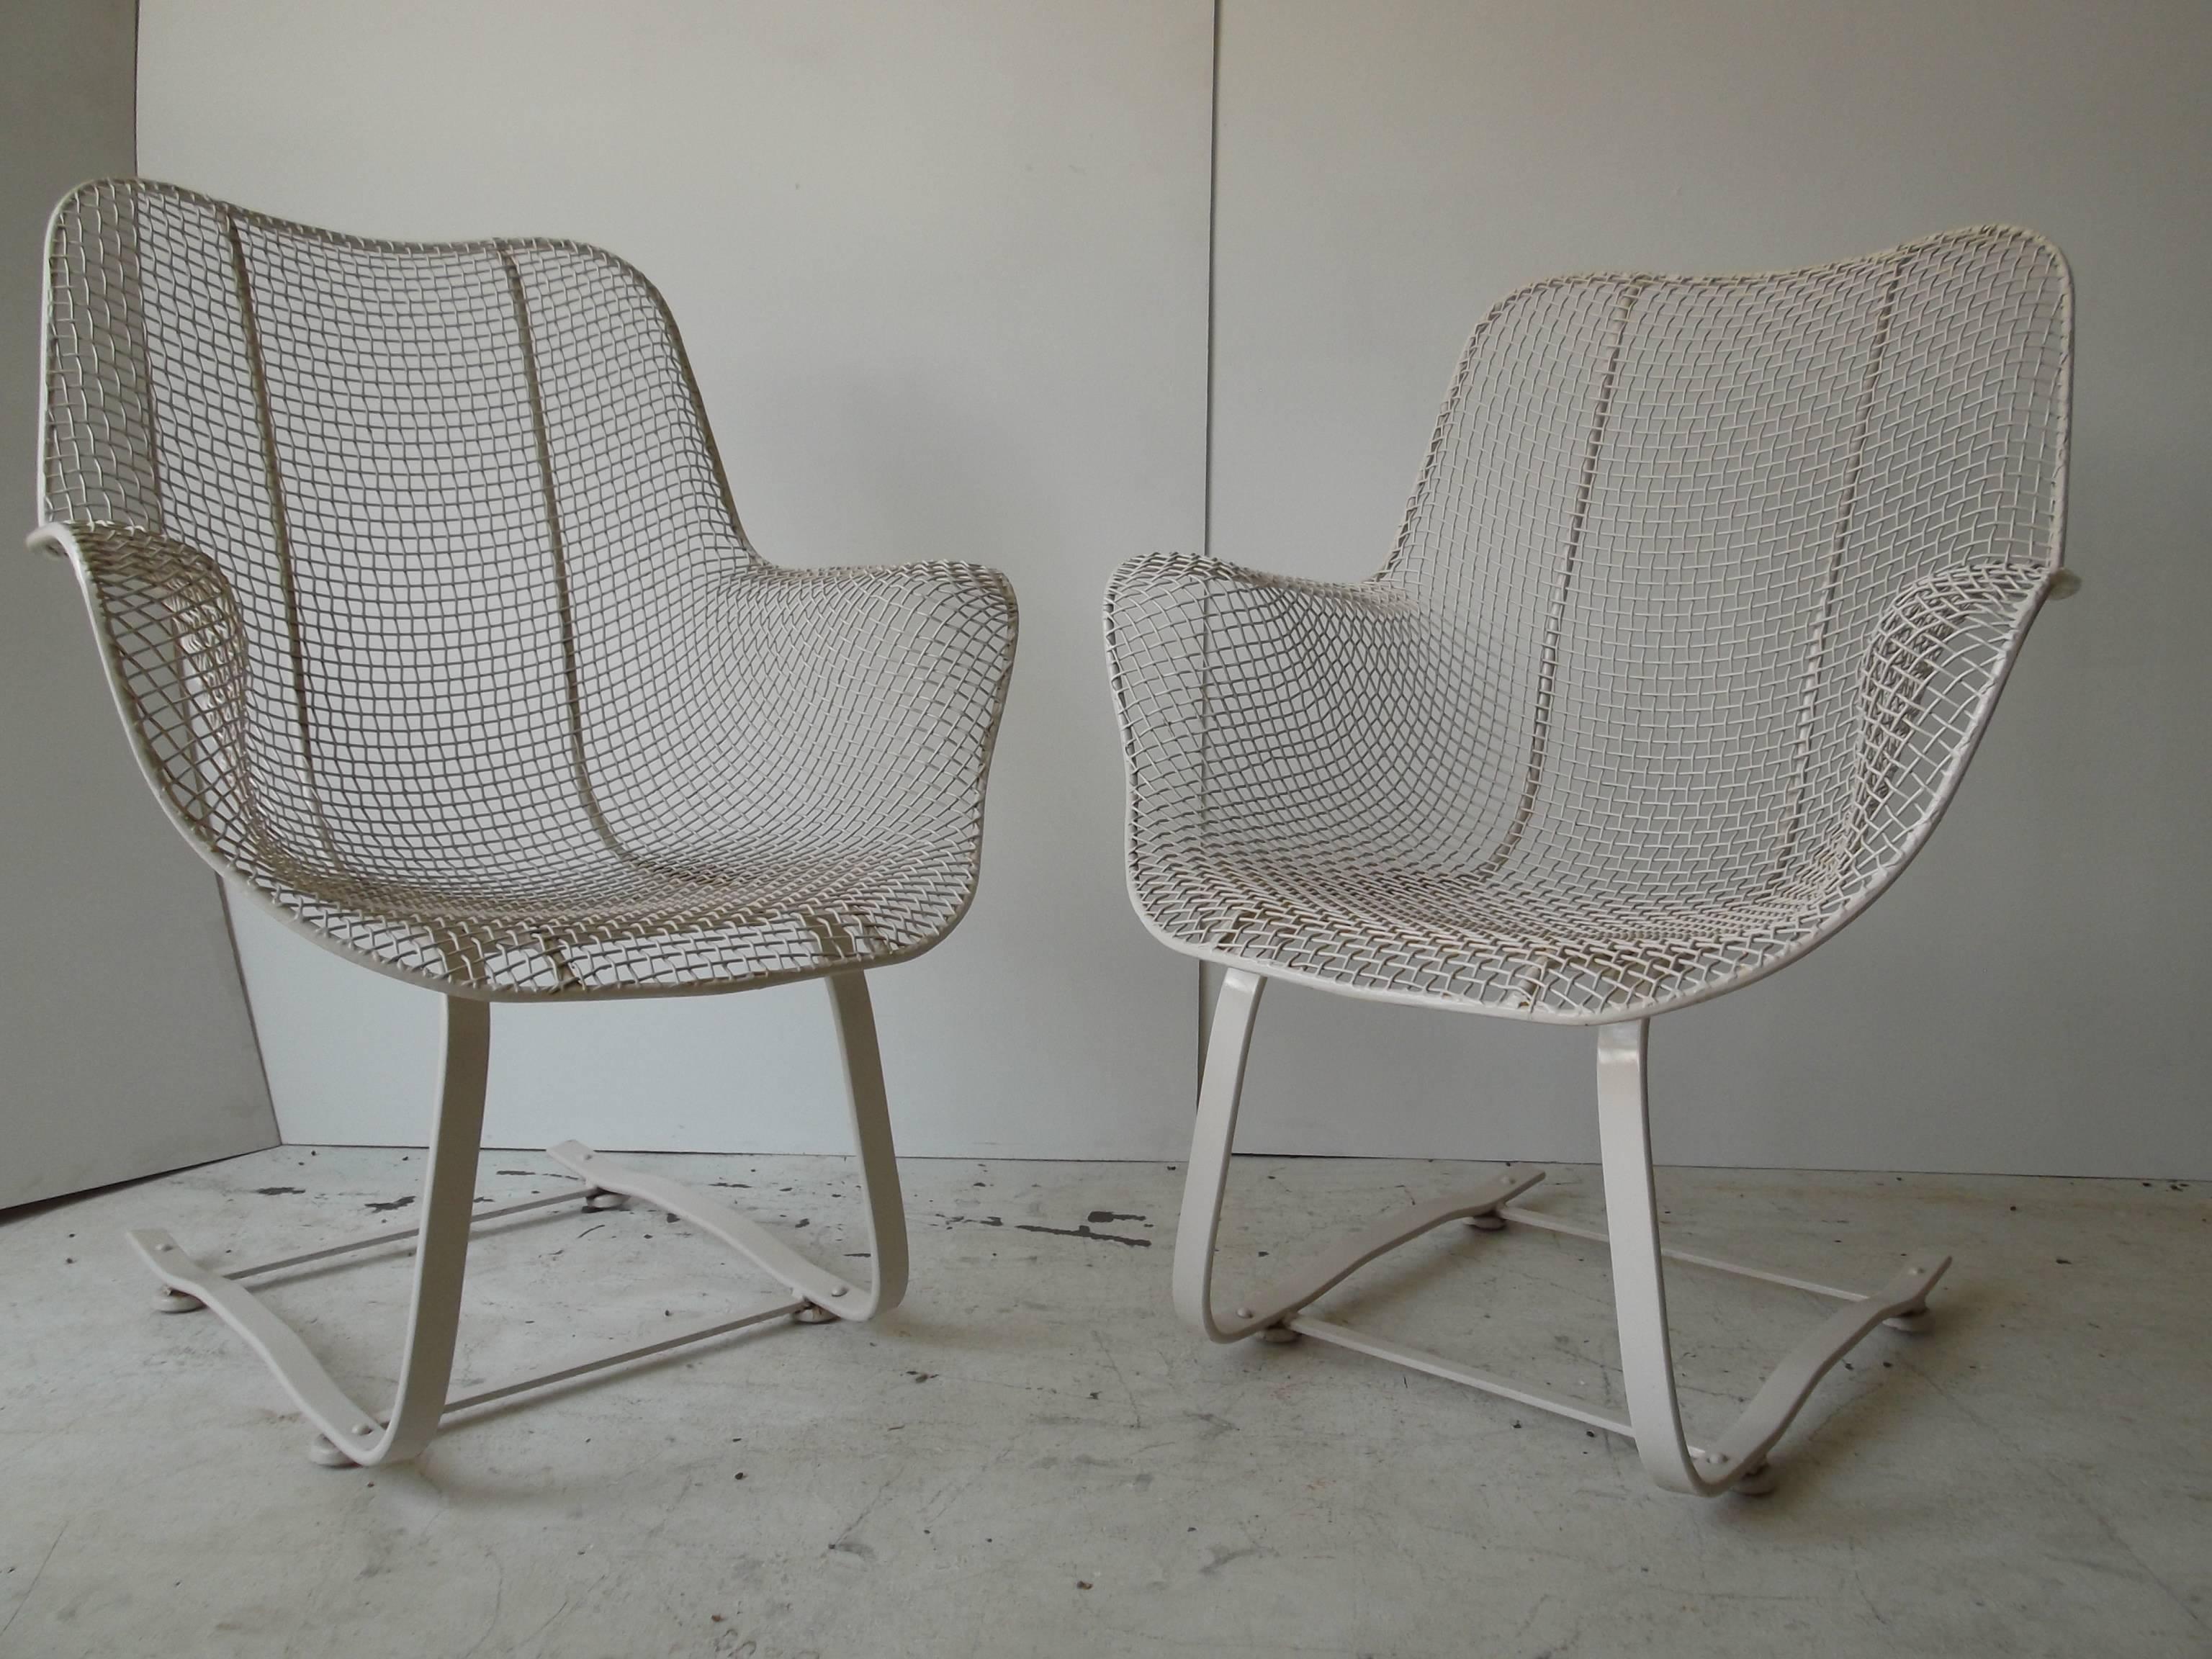 This is a very hard to find pair of Woodard Sculptura lounge chairs. They are the high back wire mesh lounges on Springer rocker bases. They are vintage from the 1960s. This is one of the best designs for Mid-Century Modern outdoor furniture by far.